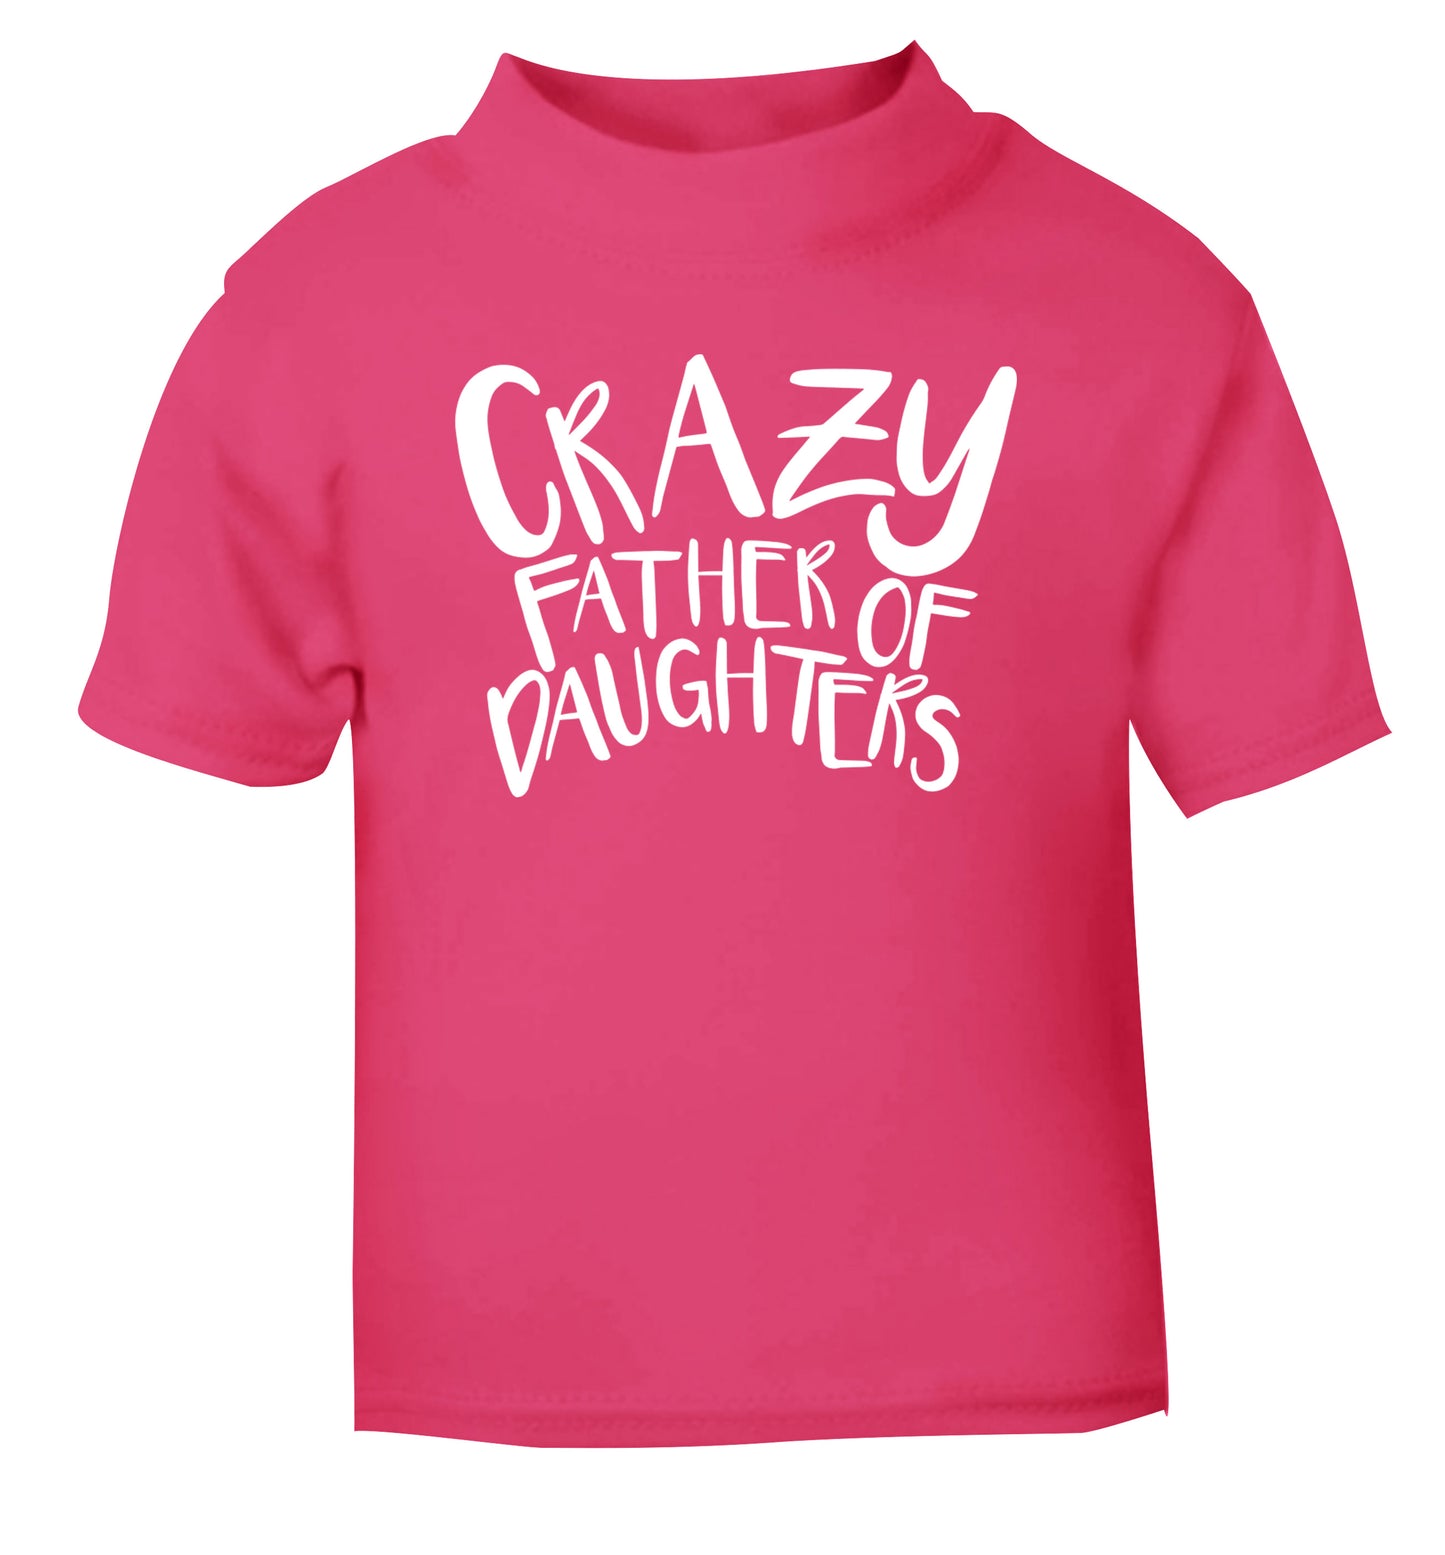 Crazy father of daughters pink Baby Toddler Tshirt 2 Years